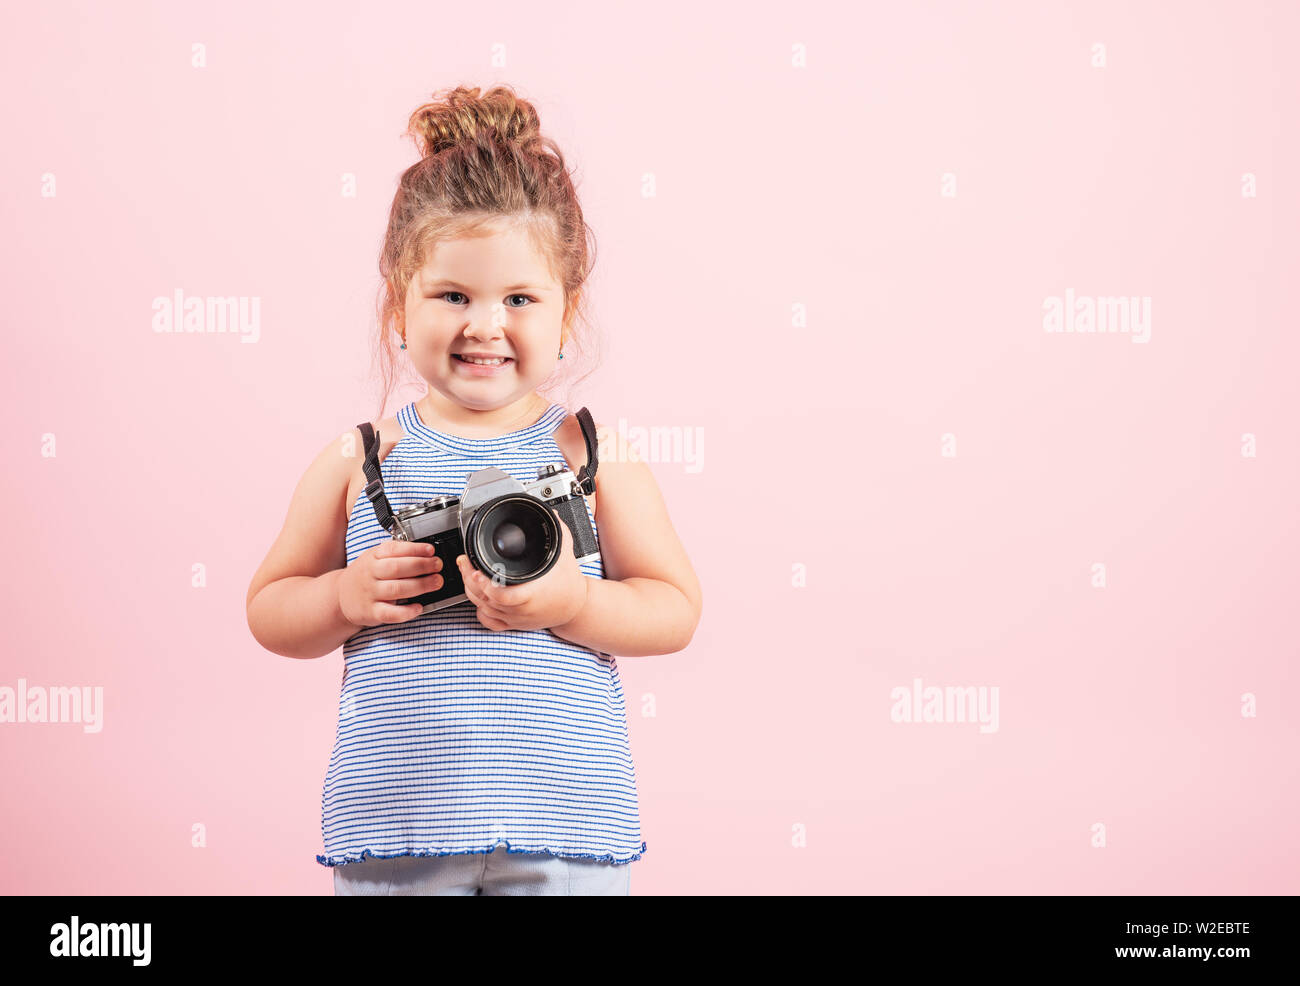 Little girl holding old vintage camera and smiling on pink background. Stock Photo